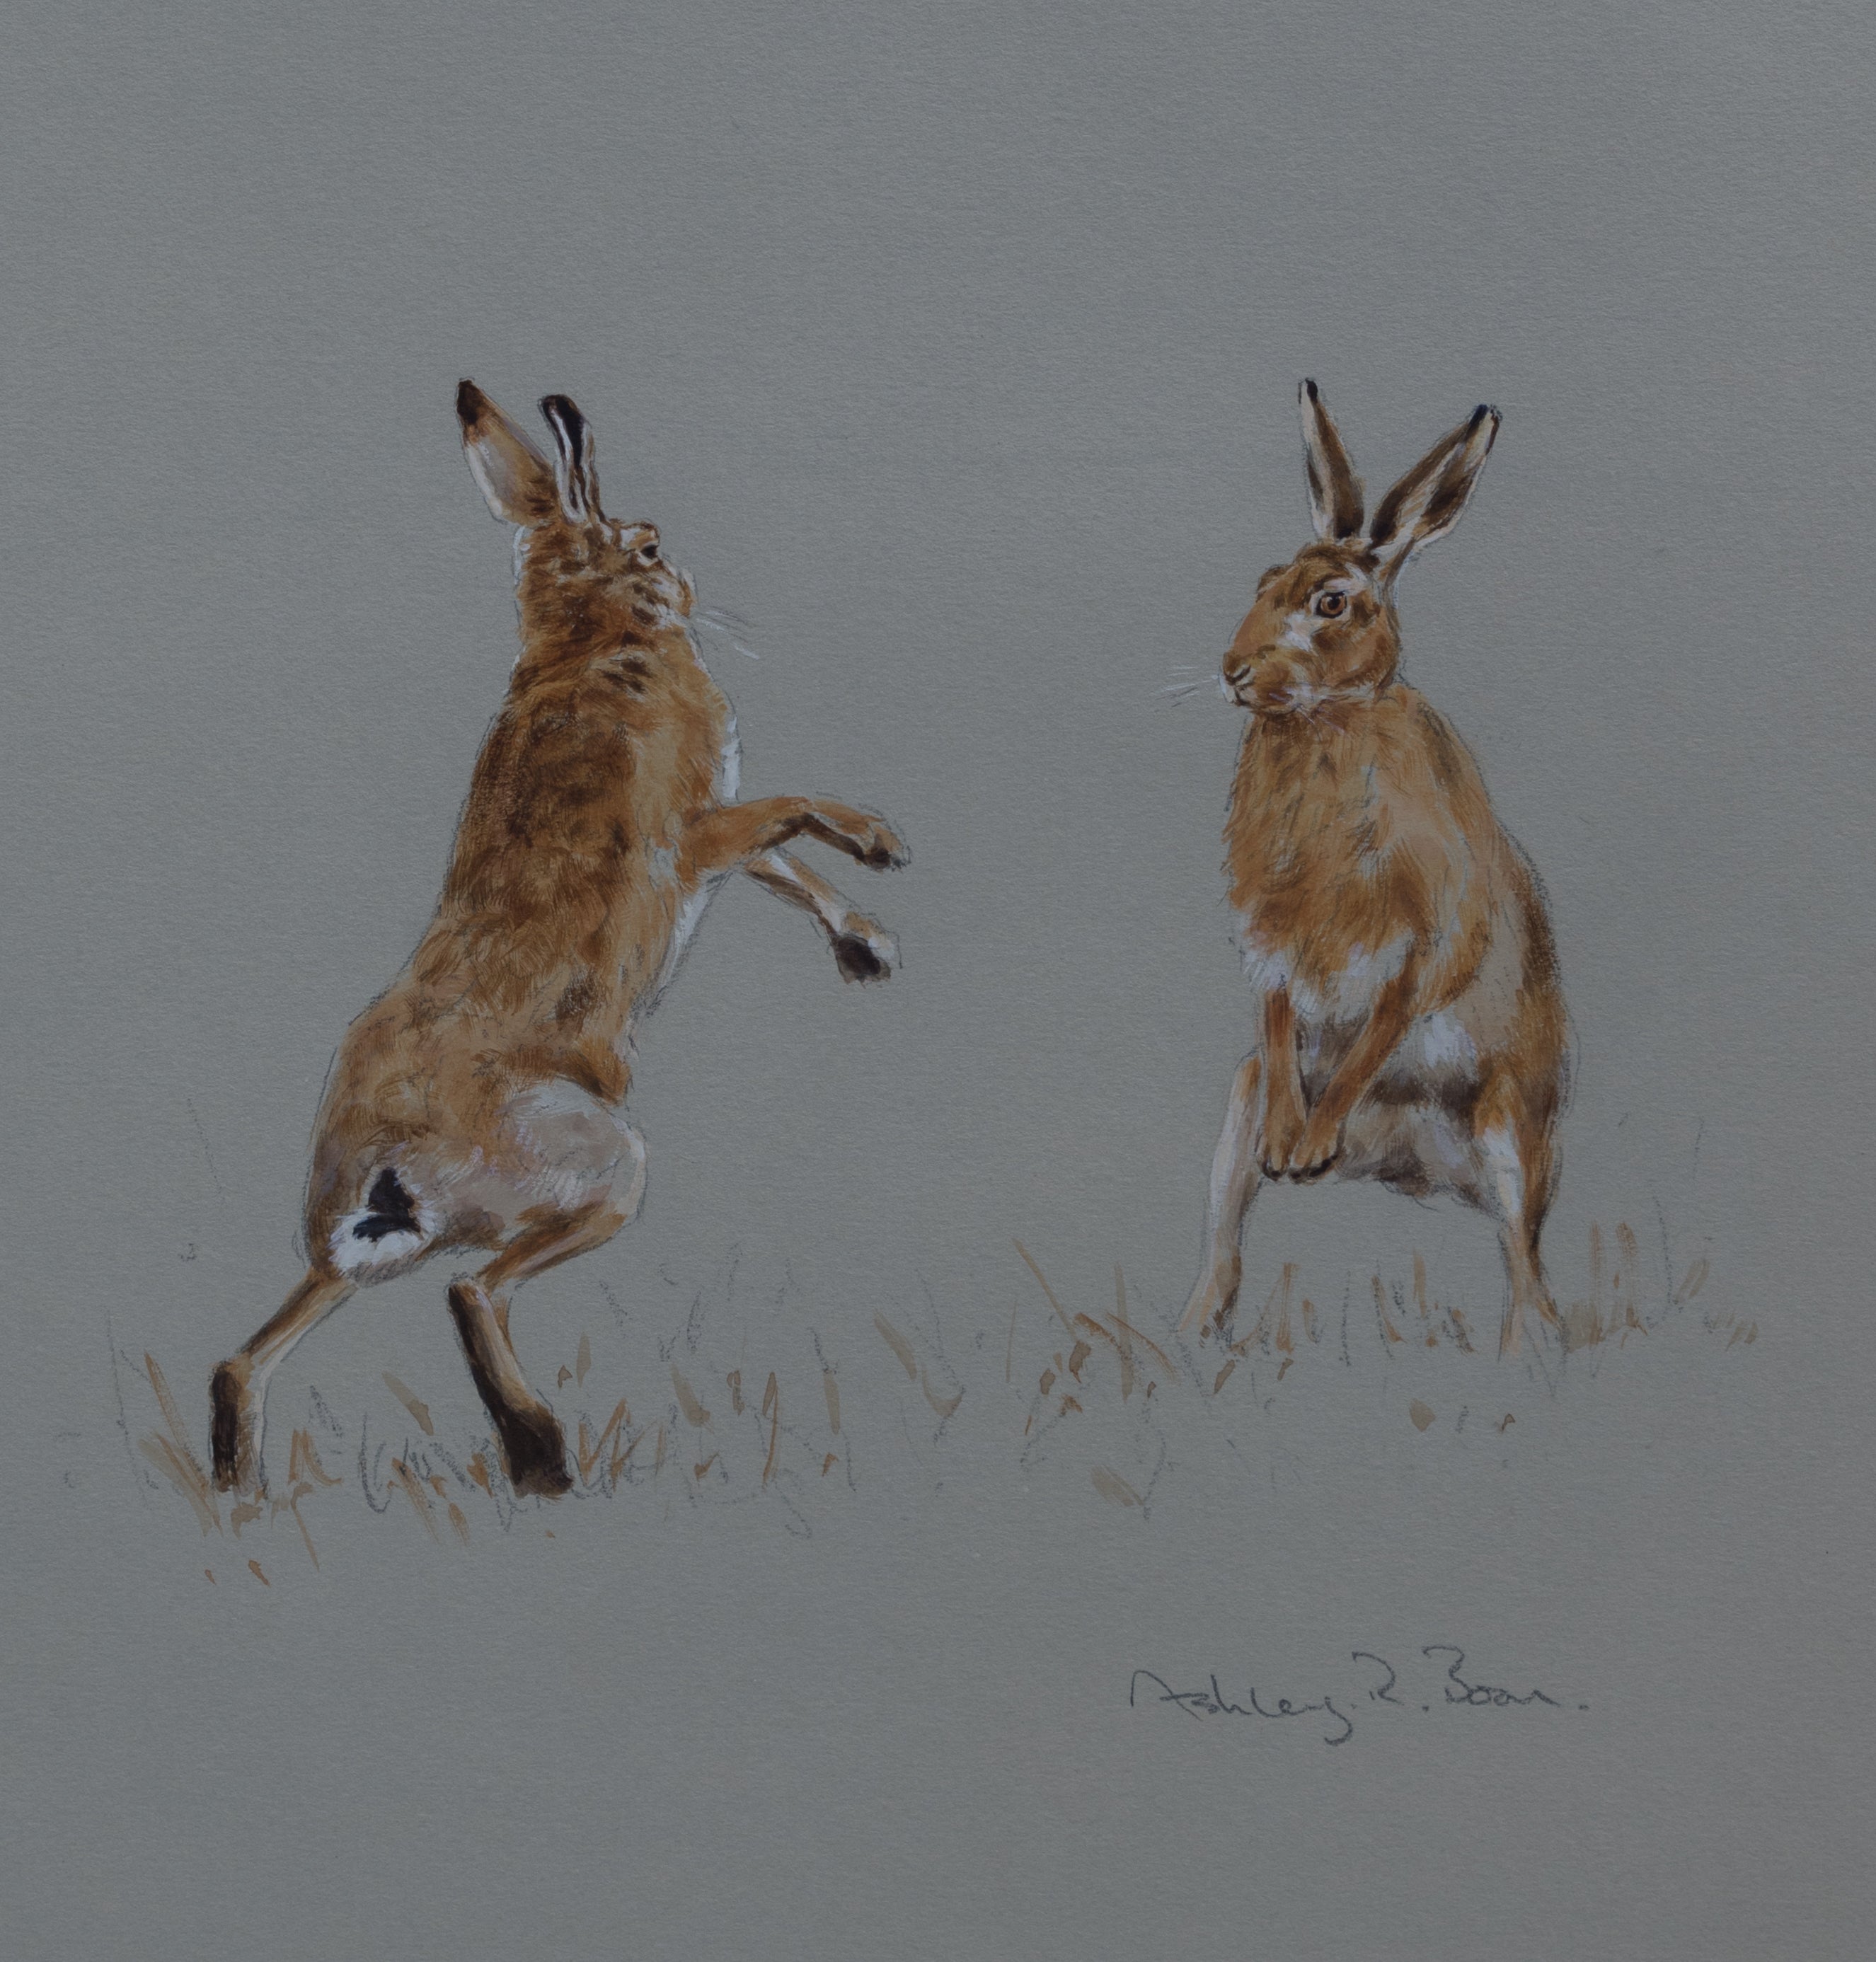 'Boxing Hares Sketch' - Original watercolour by Ashley Boon - 11" x 10"